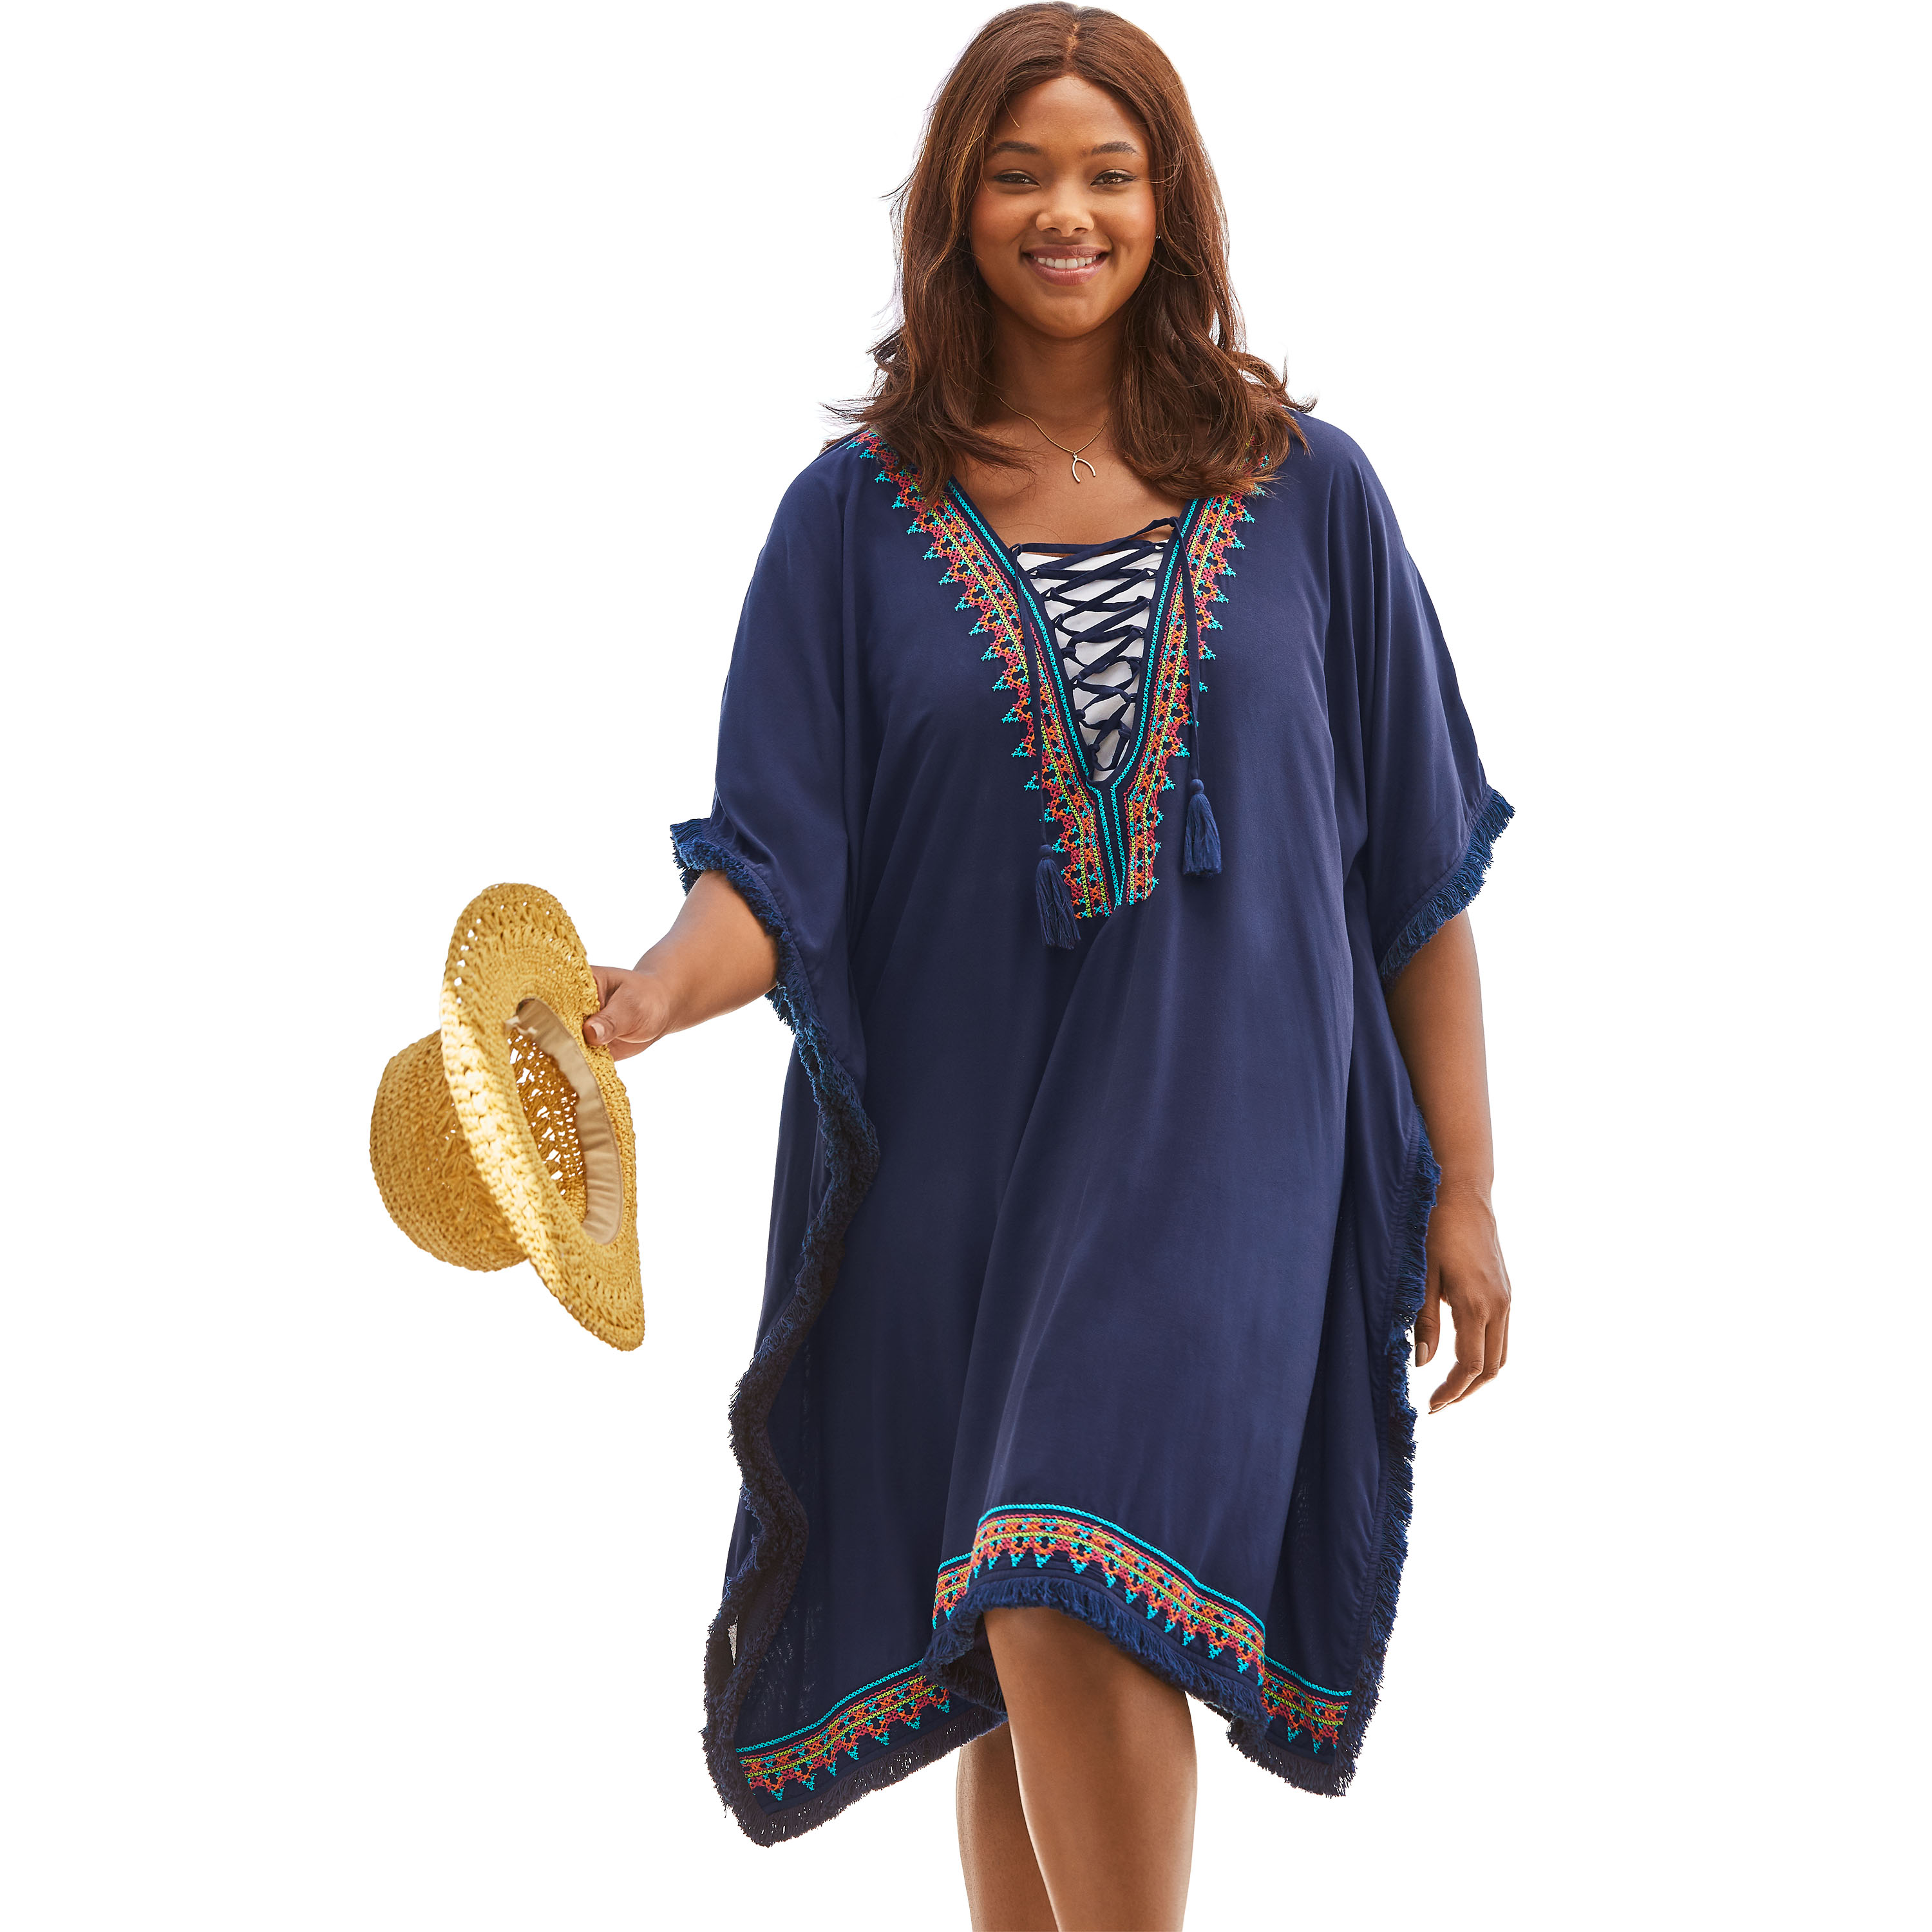 Swimsuits For All Women's Plus Size Lace-Up Caftan Cover Up M/L Navy - image 1 of 4